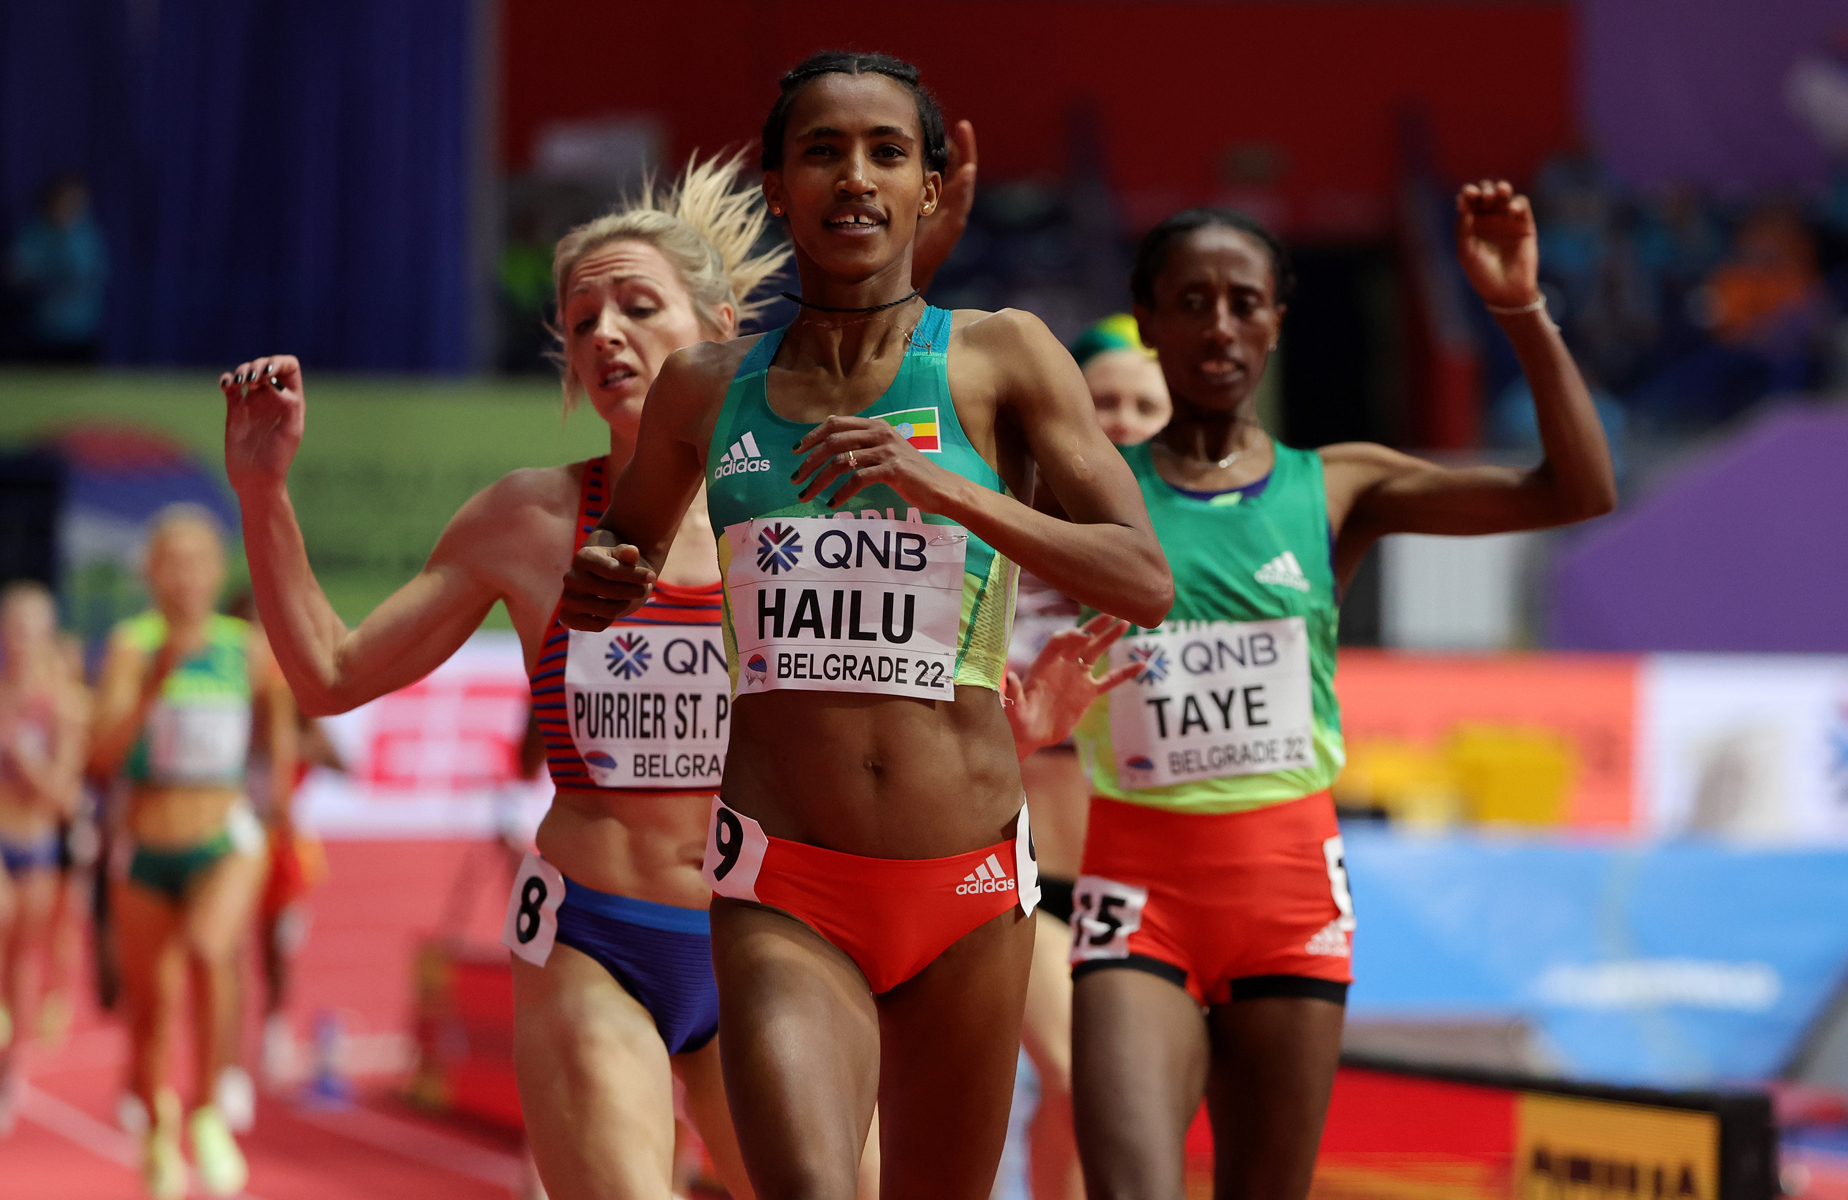 Ethiopia's Lemlem Hailu winning the women’s 3000m title at the World Athletics Indoor Championships in Belgrade / Credit: Getty Images for World Athletics